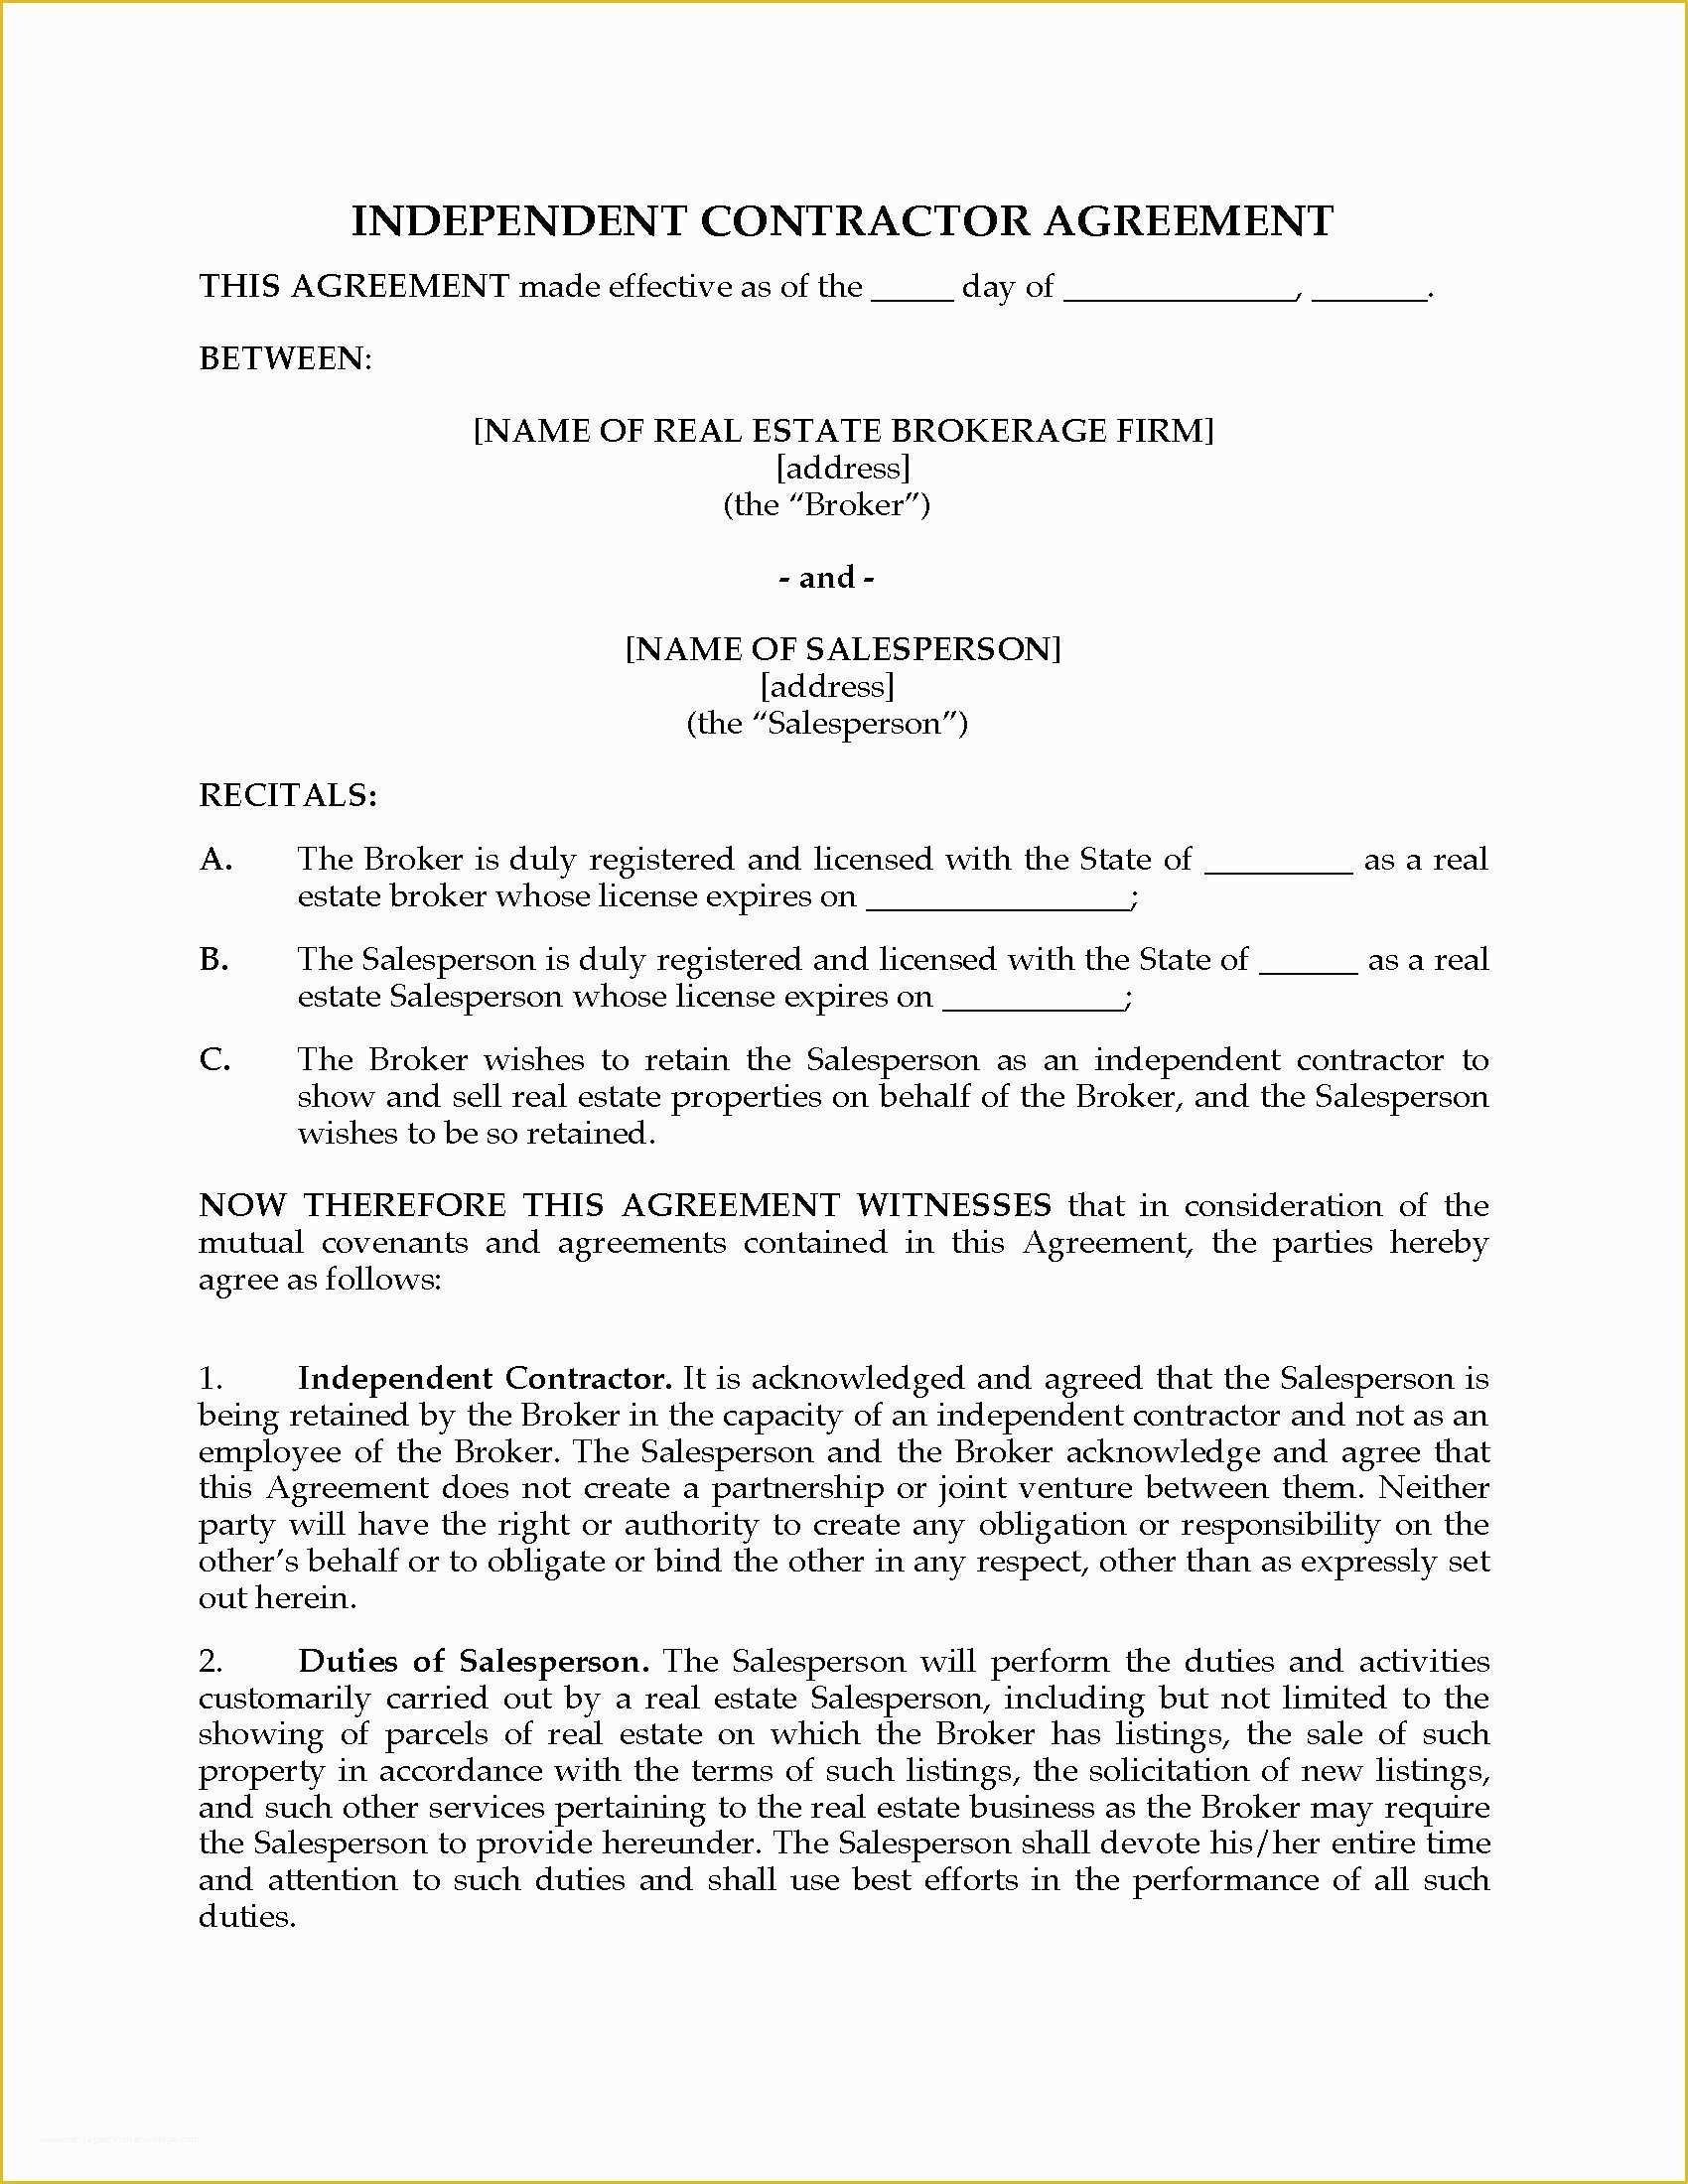 Free Independent Sales Contractor Agreement Template Of Usa Independent Contractor Agreement for Real Estate